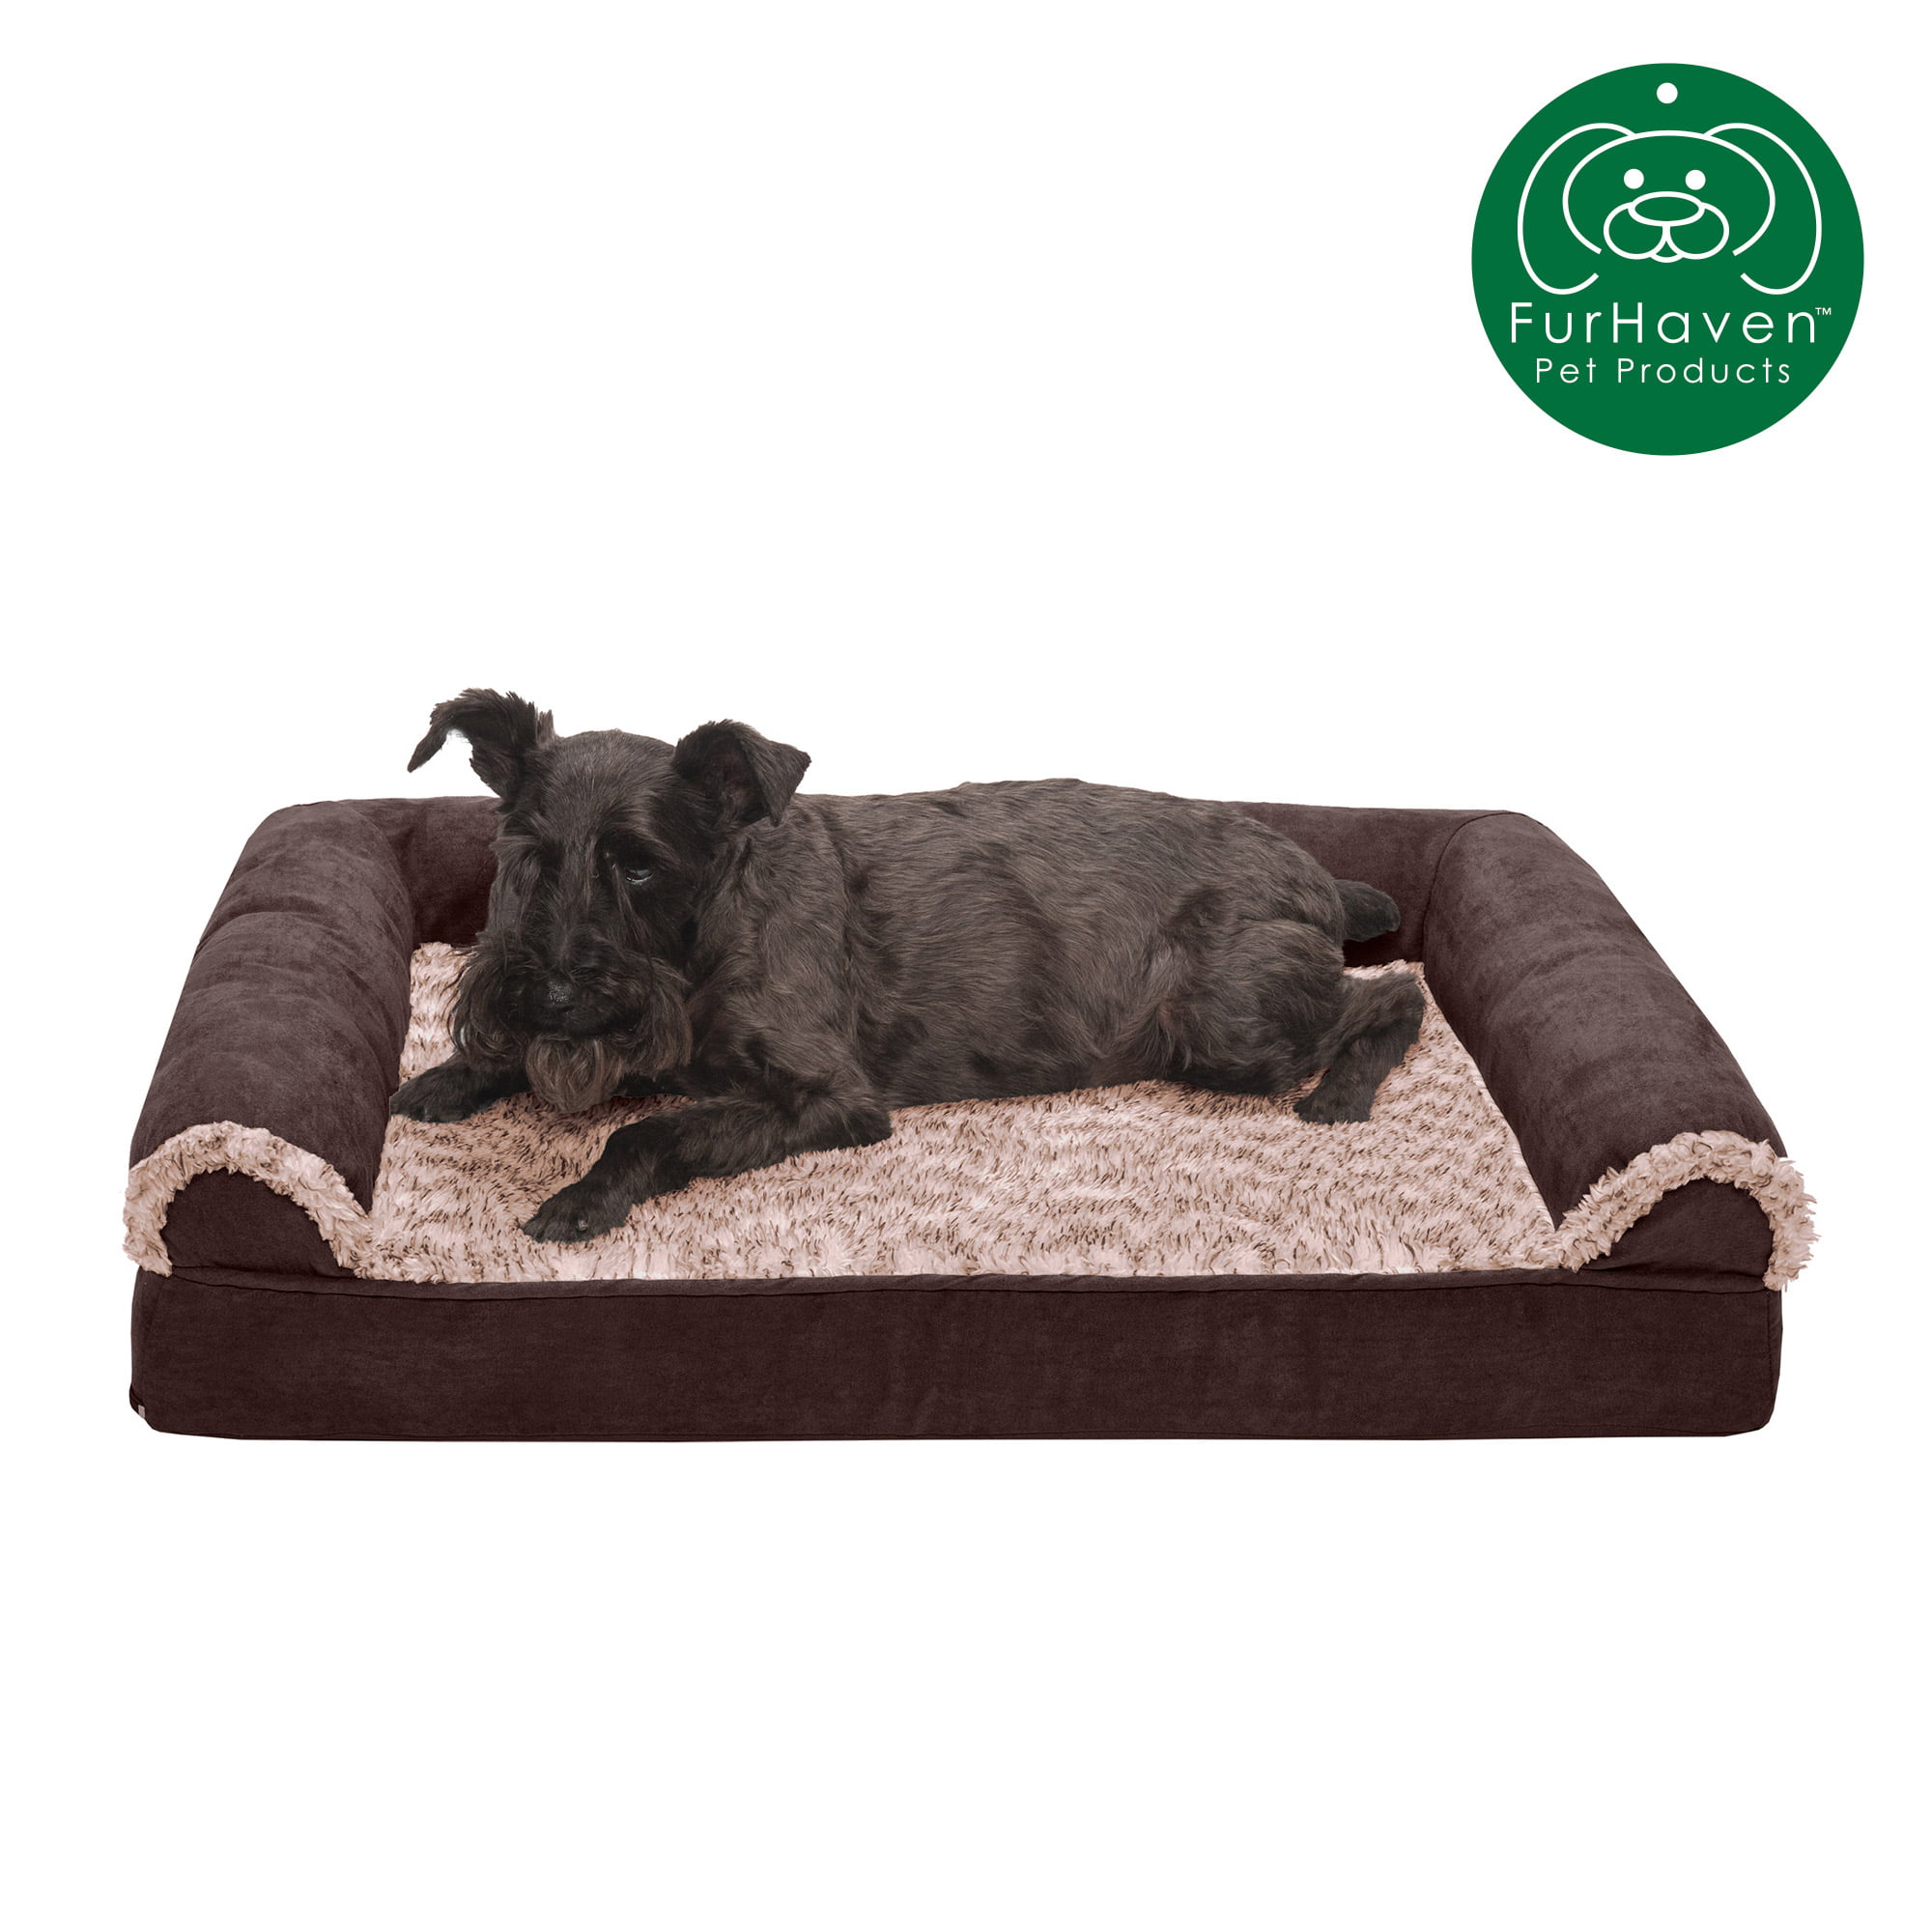 Furhaven Pet Dog Bed Therapeutic Chaise Lounge Sofa-Style Living Room Corner Couch Pet Bed w/ Removable Cover for Dogs & Cats Available in Multiple Colors & Styles 